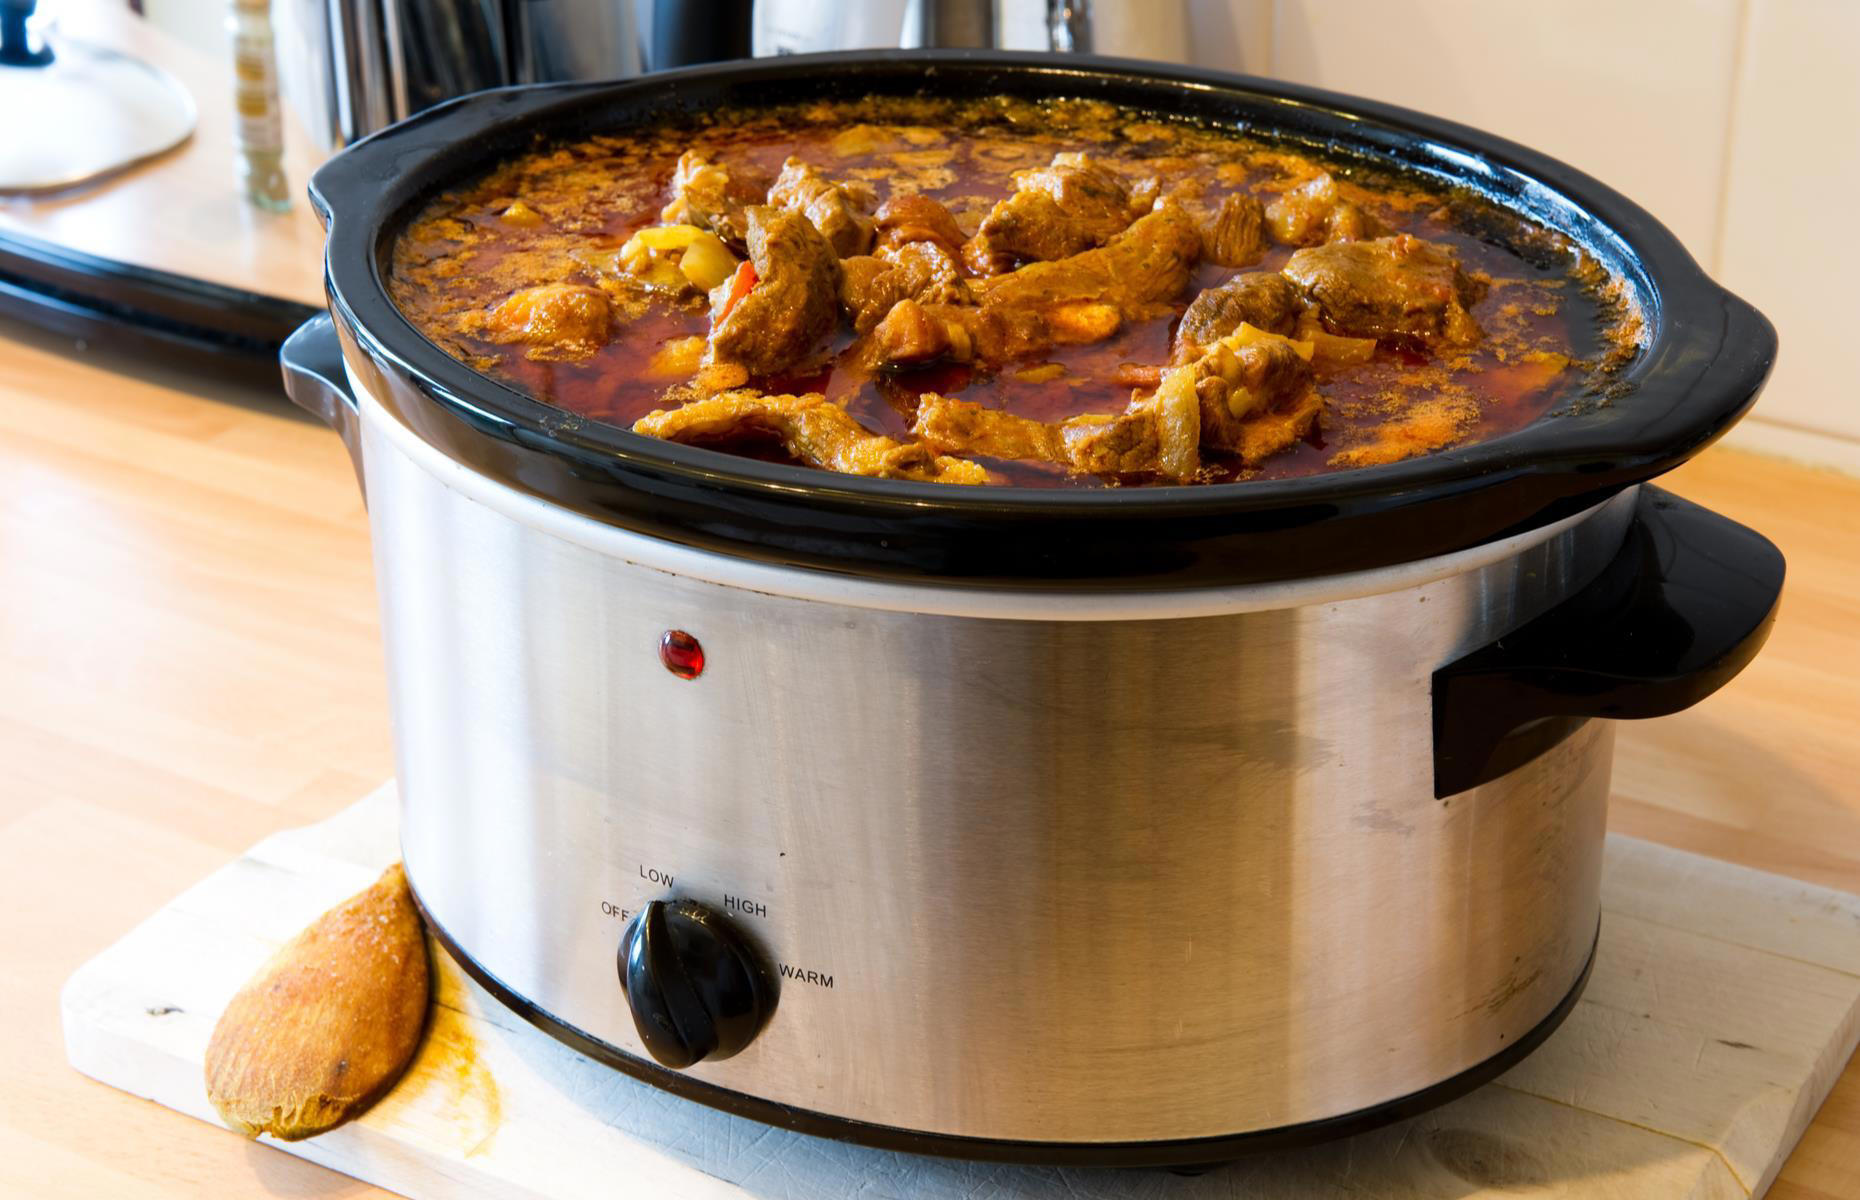 How to use a slow cooker - things you shouldn't slow cook